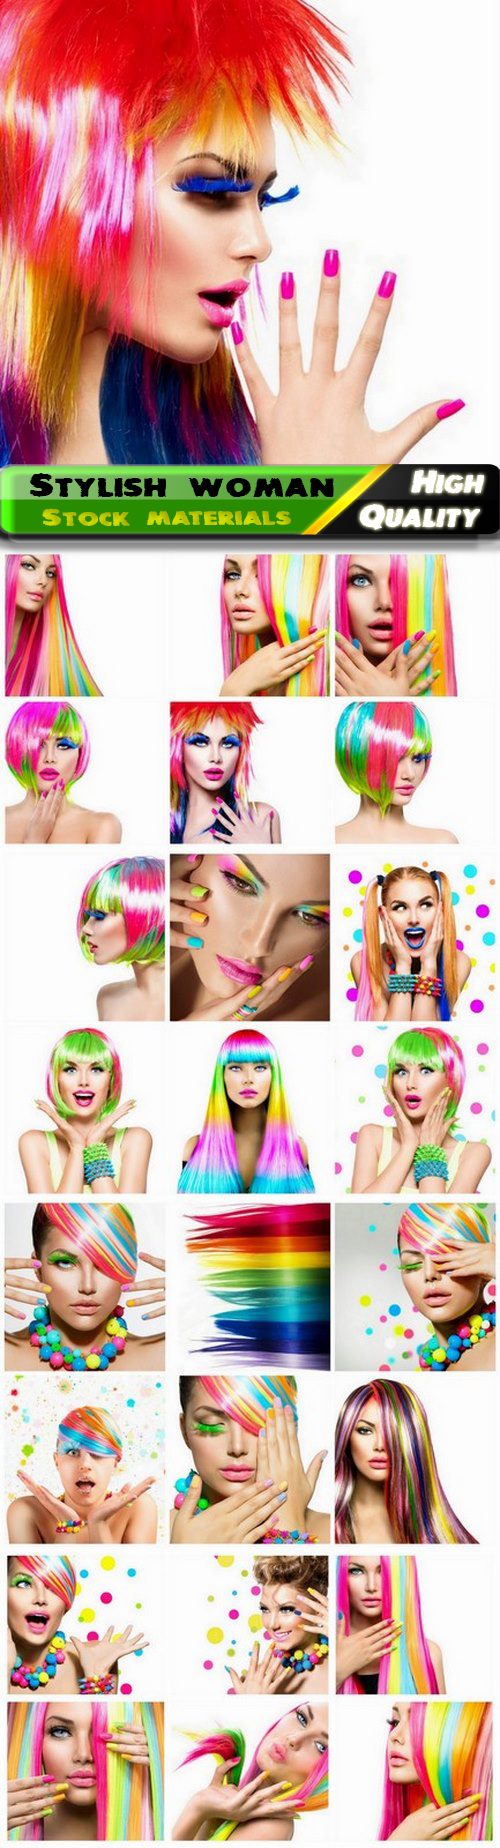 Stylish woman and fashion girl with colorful hair and makeup - 25 Jpg